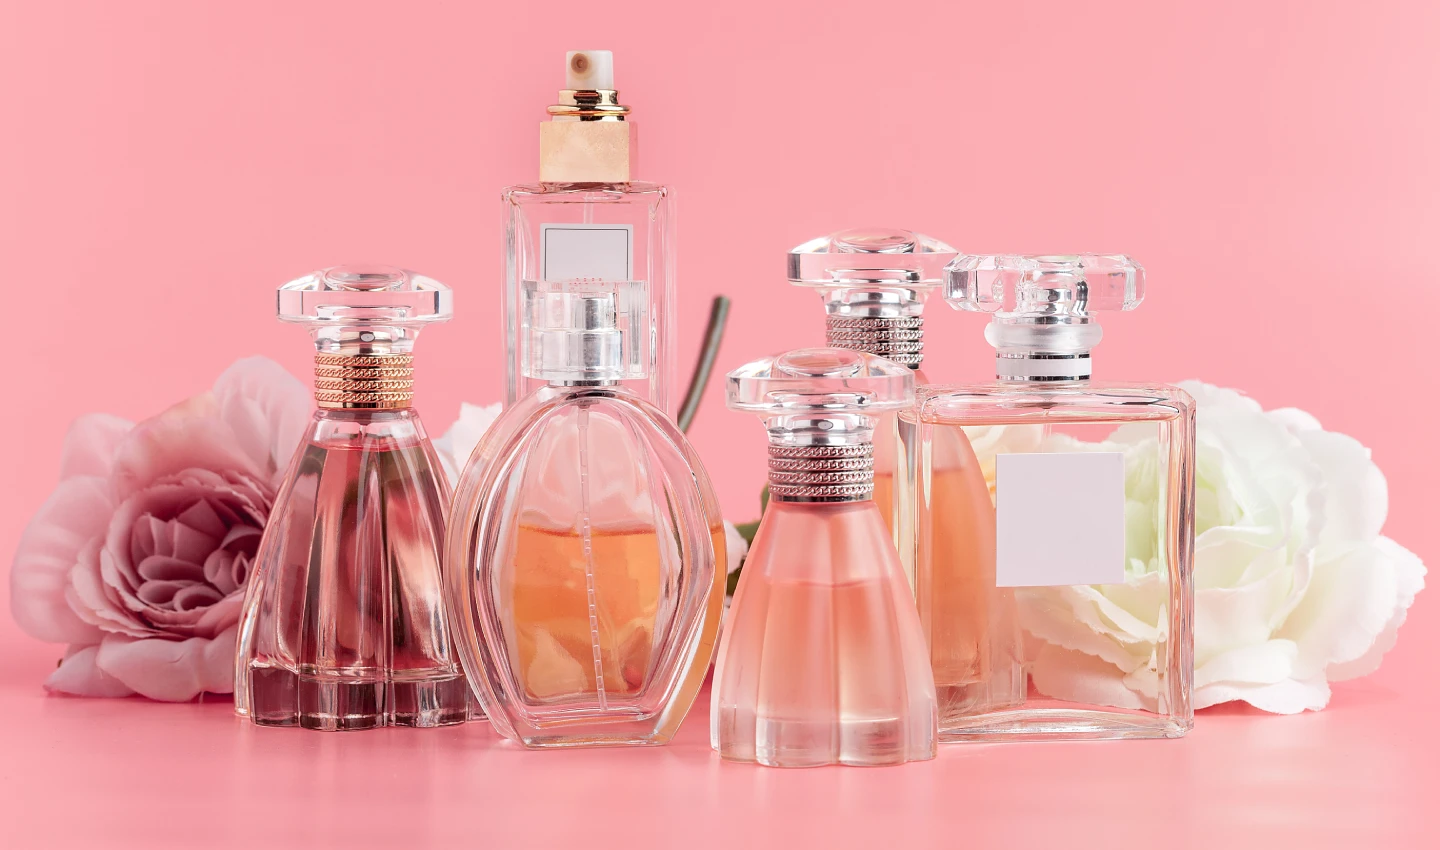 Collection of various perfume bottles, illustrating the diversity in the perfume industry and its hidden production impacts